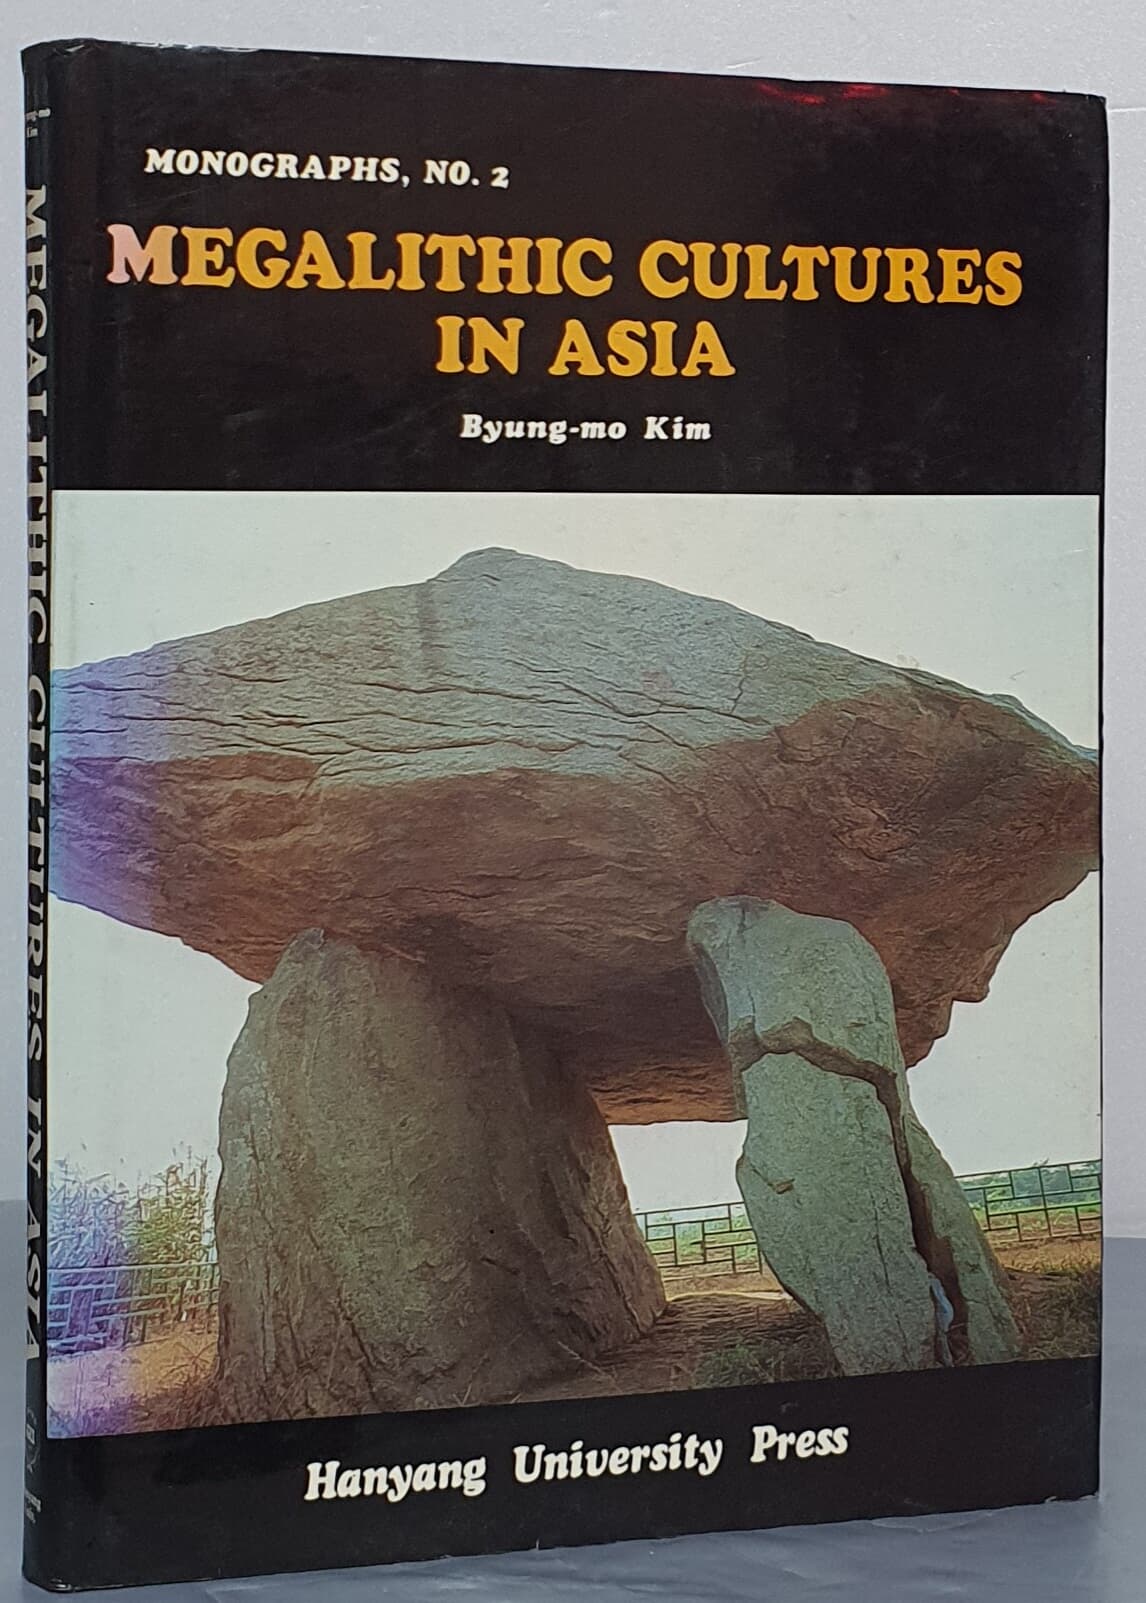 MEGALITHC CULTURES IN ASIA